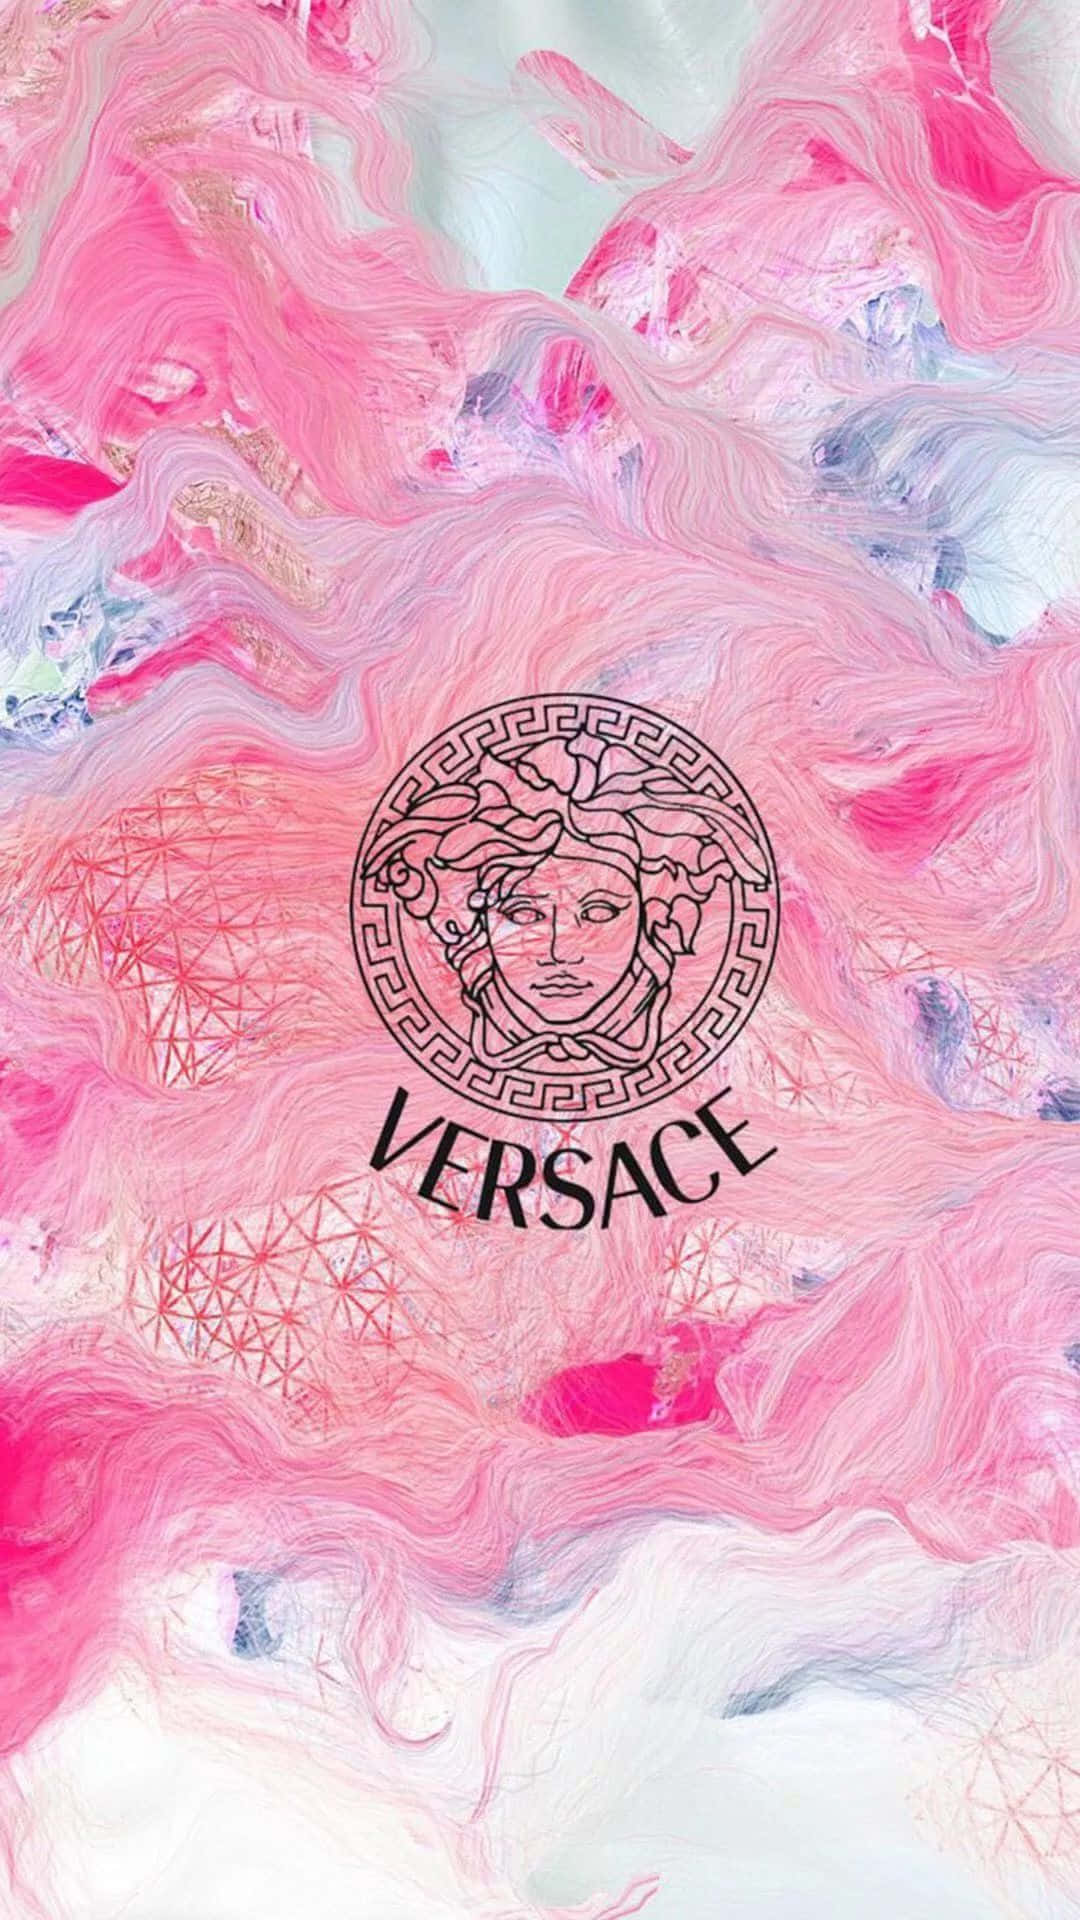 “Feel luxurious with Versace”